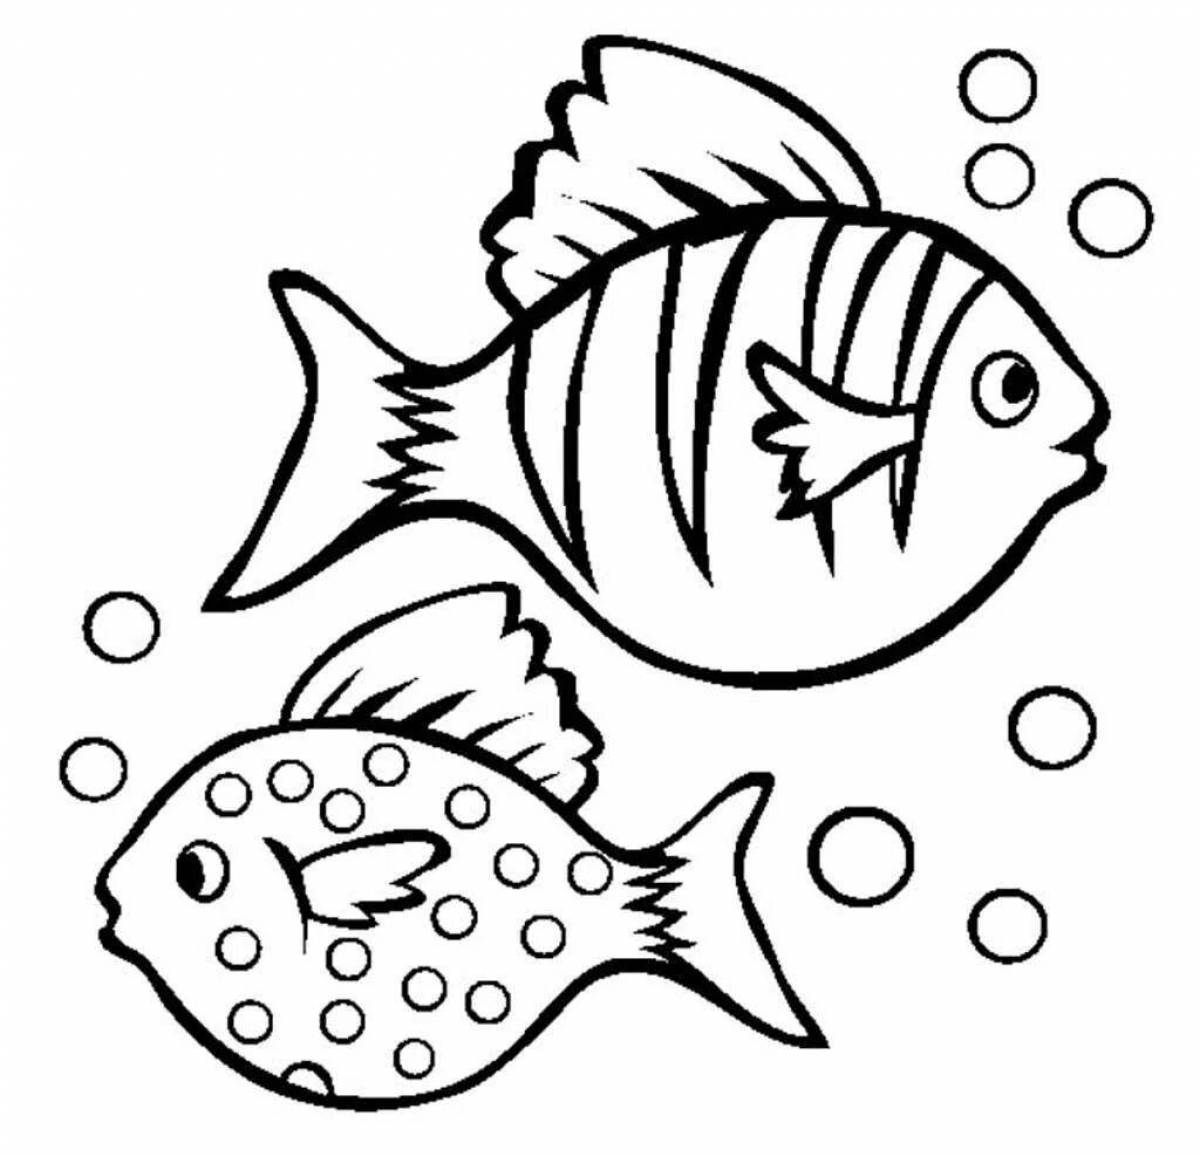 A funny fish coloring book for 3-4 year olds